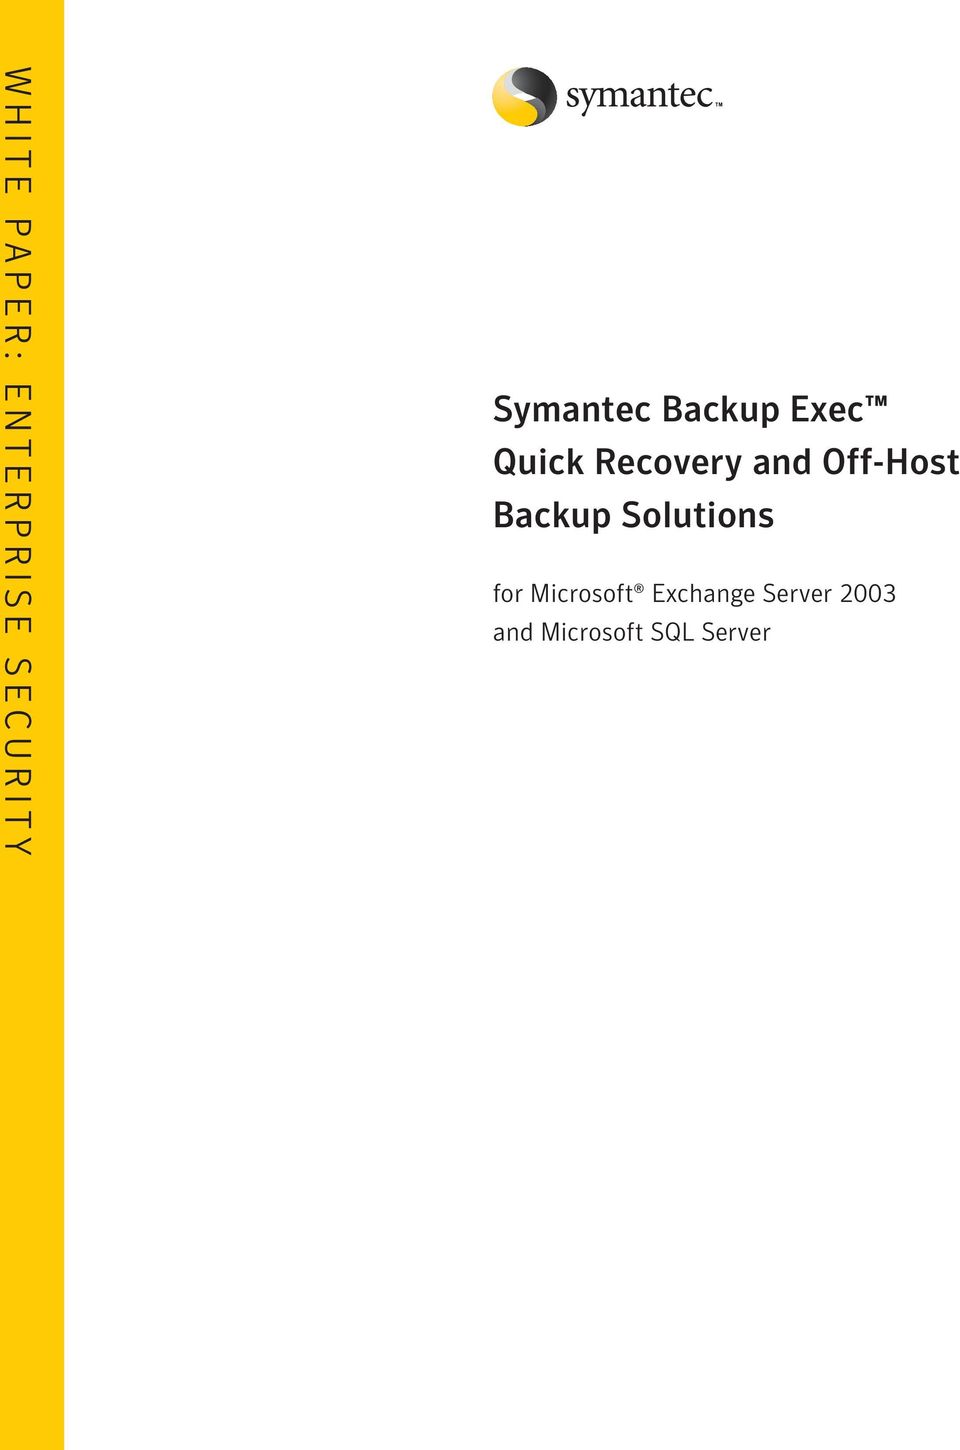 Off-Host Backup Solutions for Microsoft